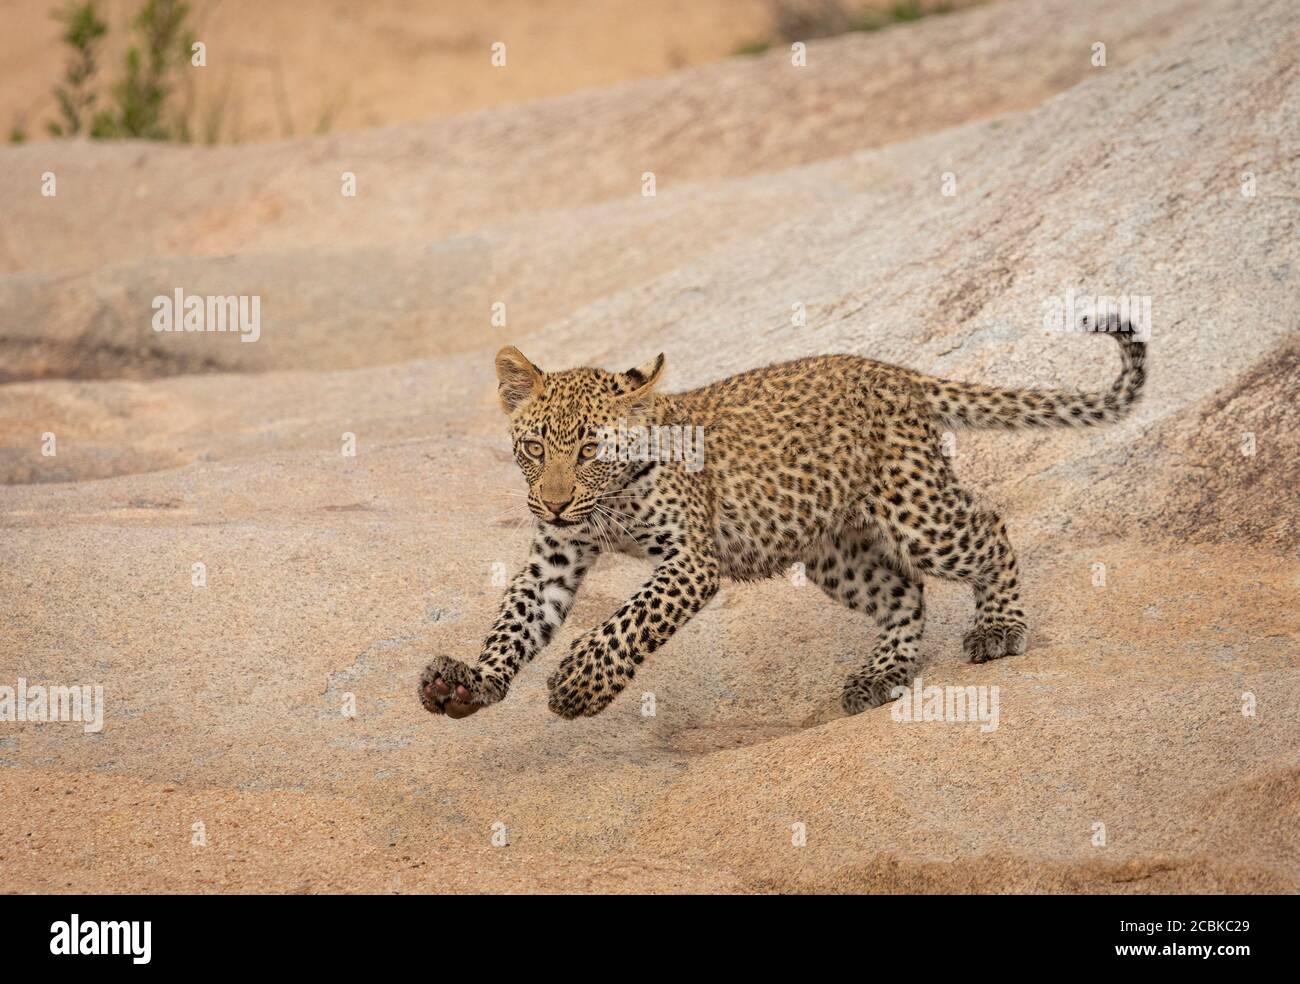 Small leopard cub running on rock and sand in Kruger Park South Africa Stock Photo